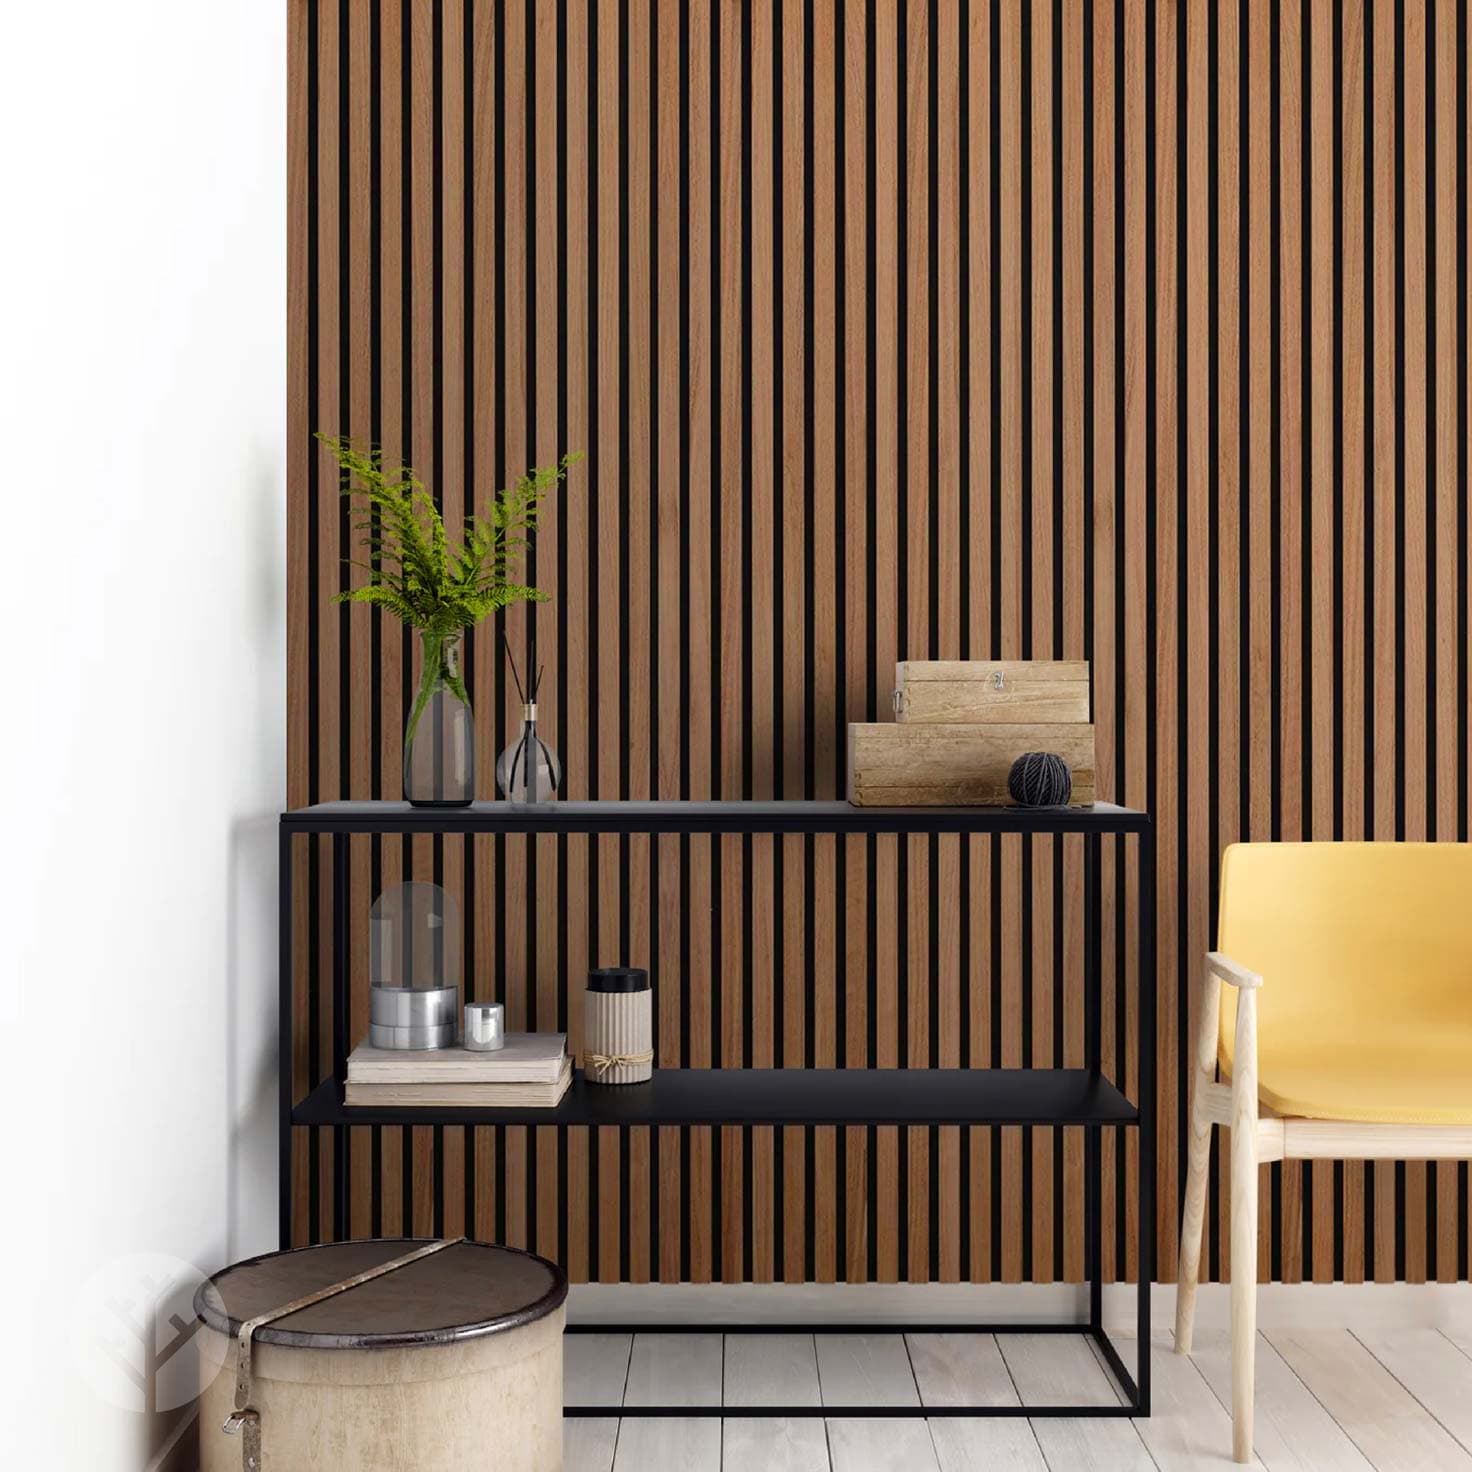 WVH® - the only wooden wall paneling with insulating properties too!